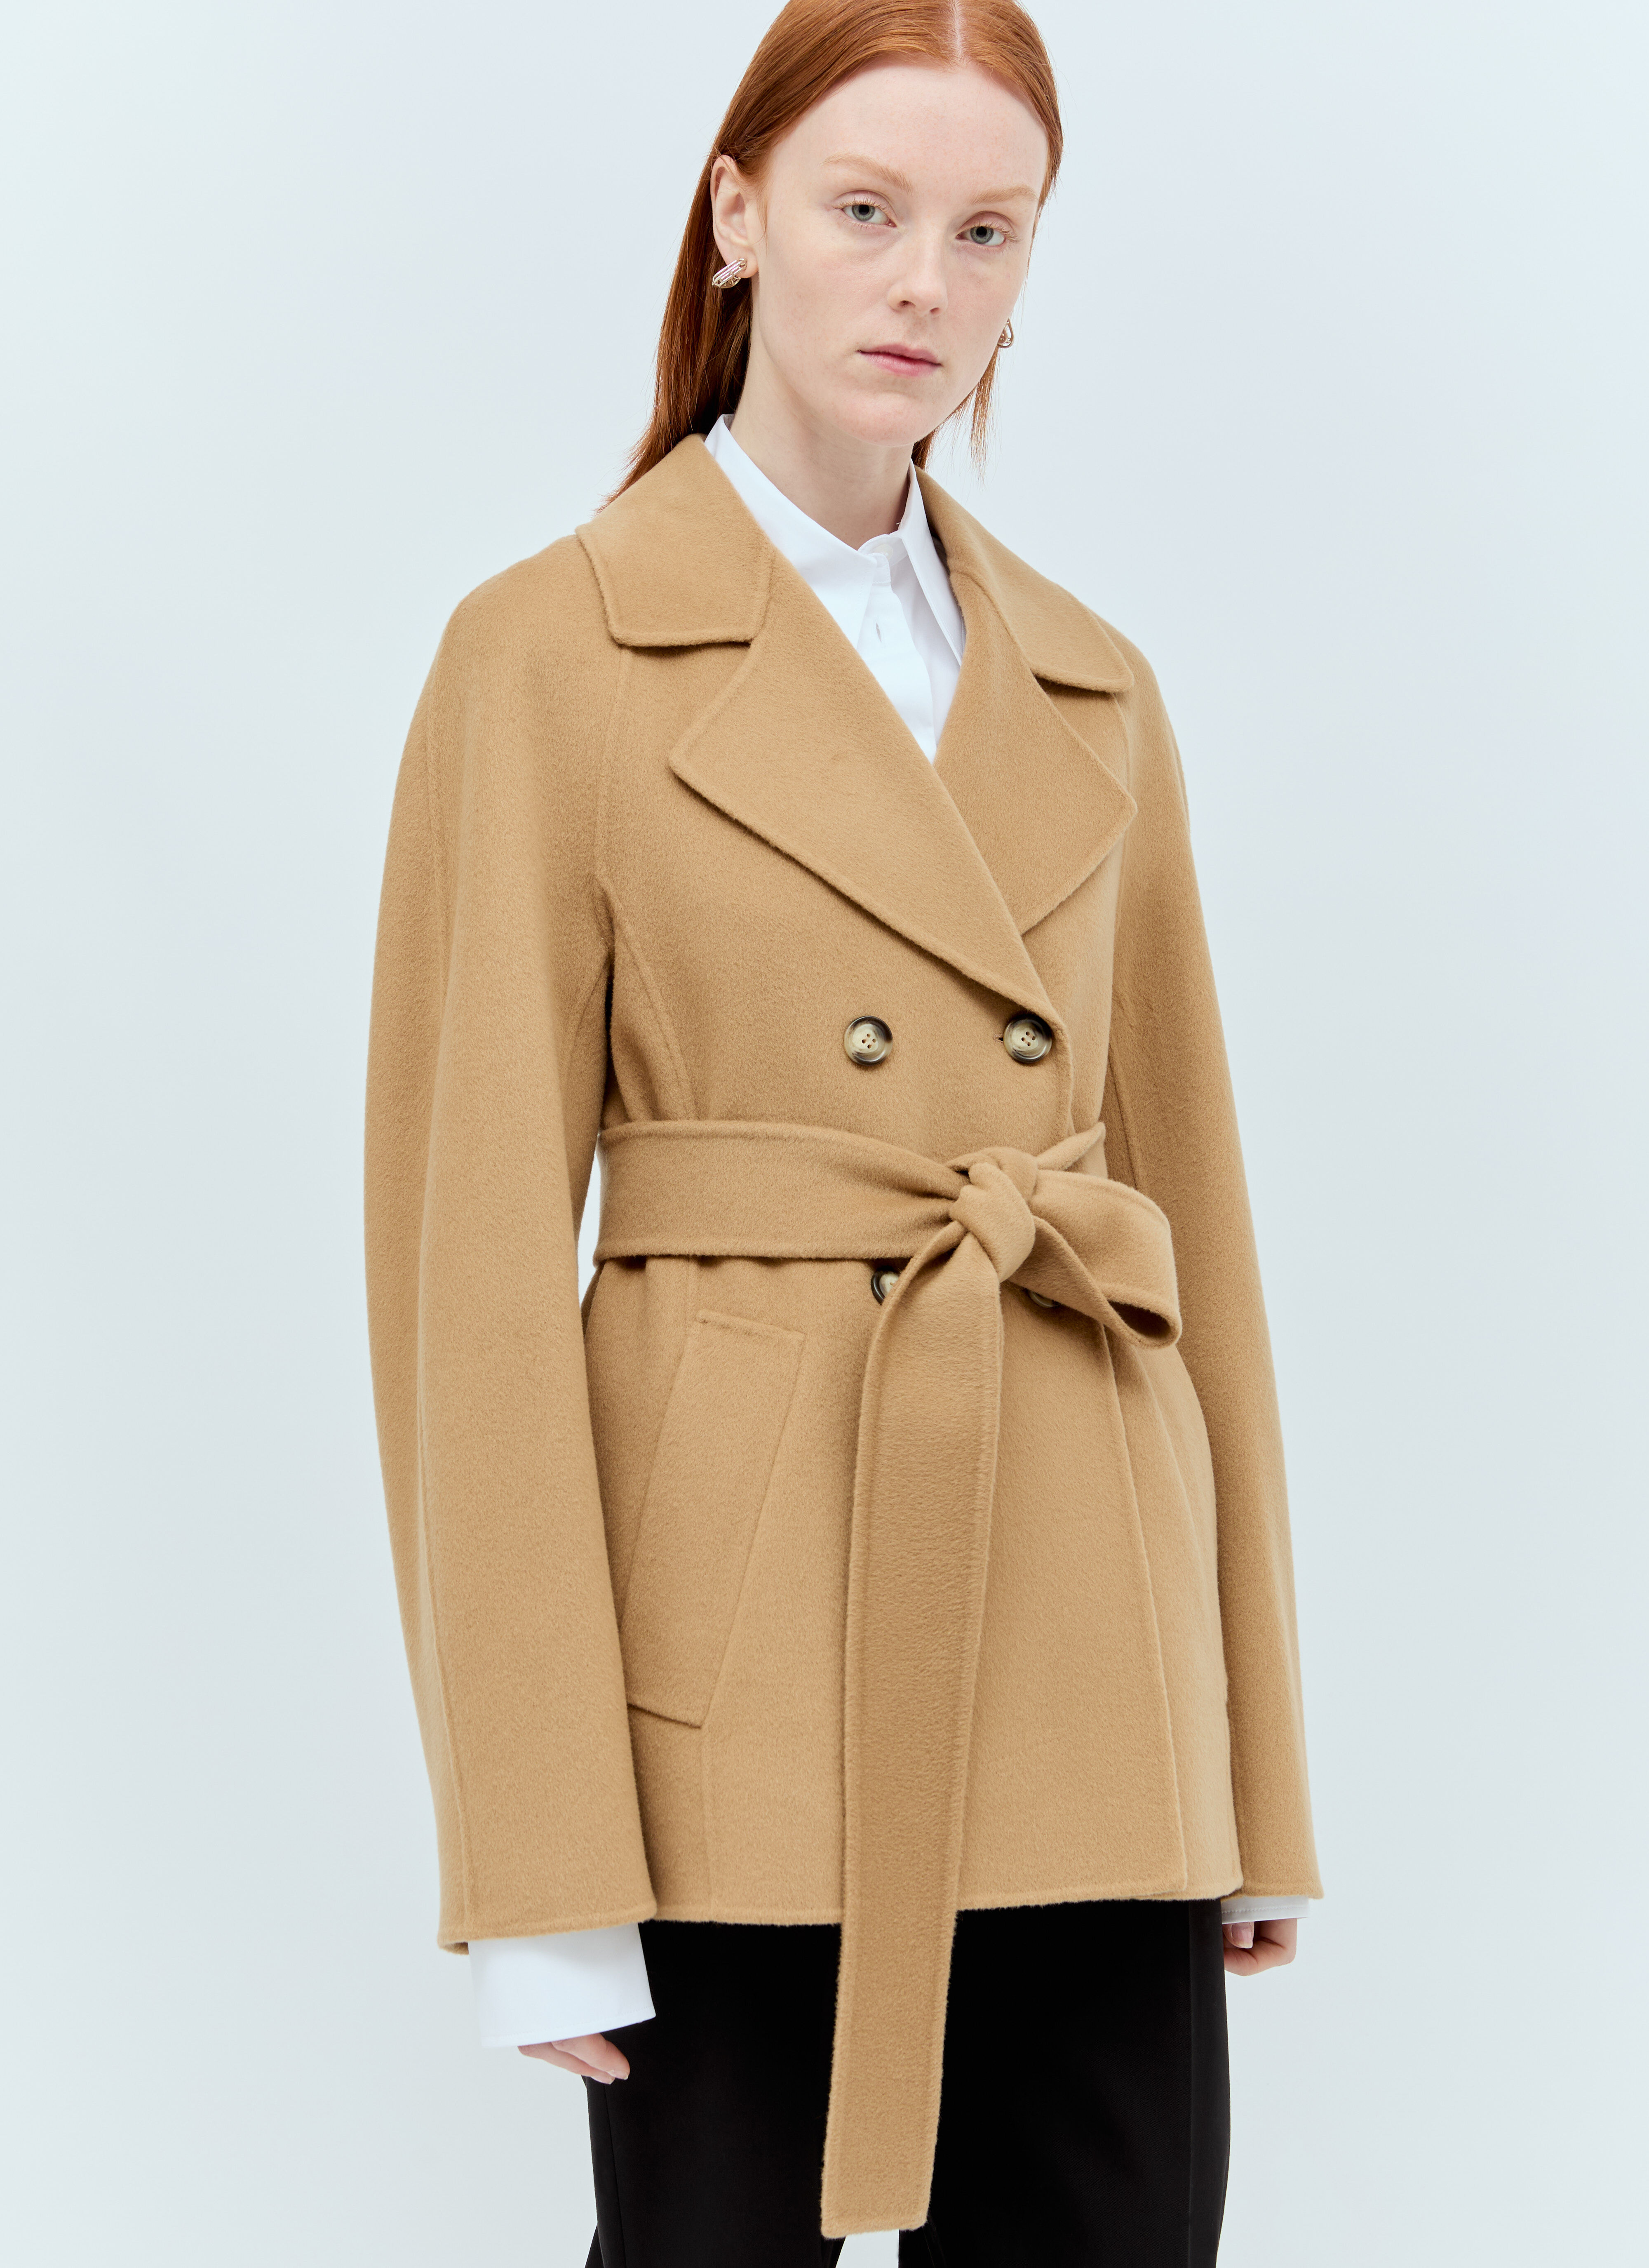 Sportmax Wool-And-Cashmere-Blend Coat White spx0256003